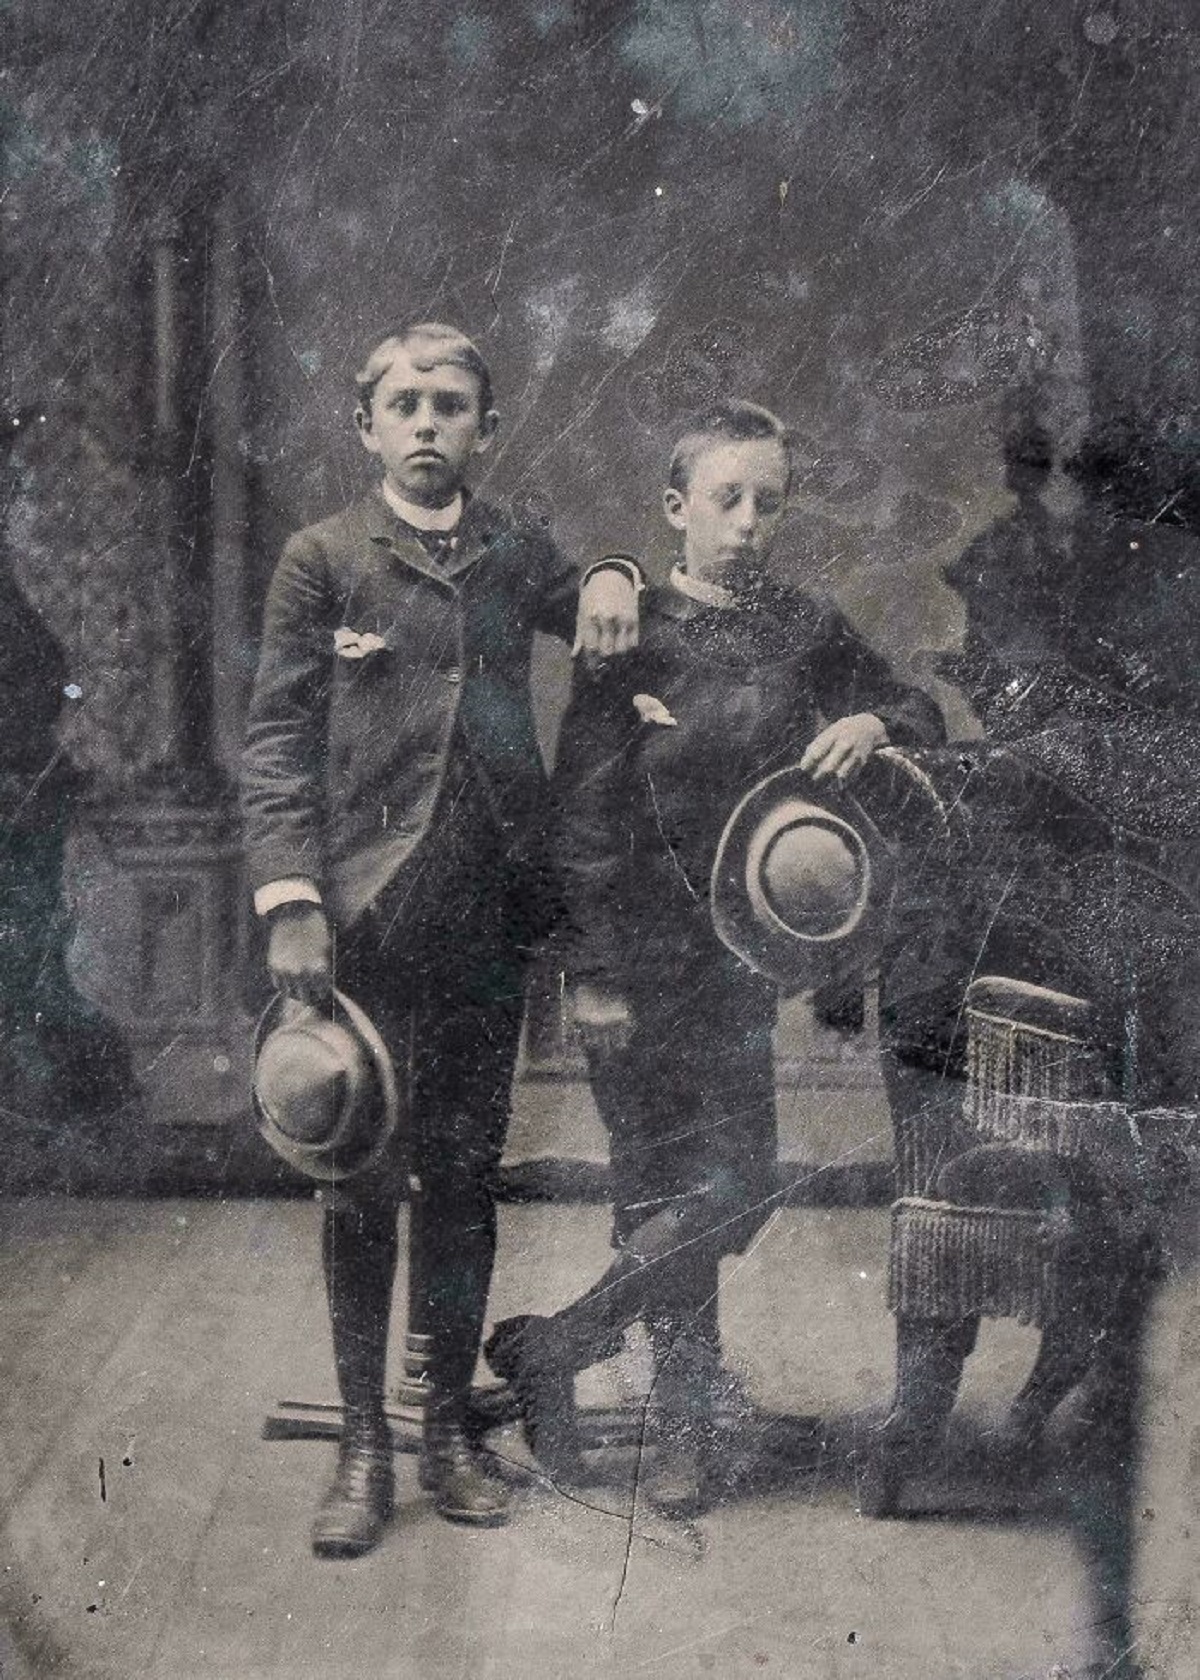 Boy Poses With Deceased Brother - 1800s Tintype - Found At Thrift Store